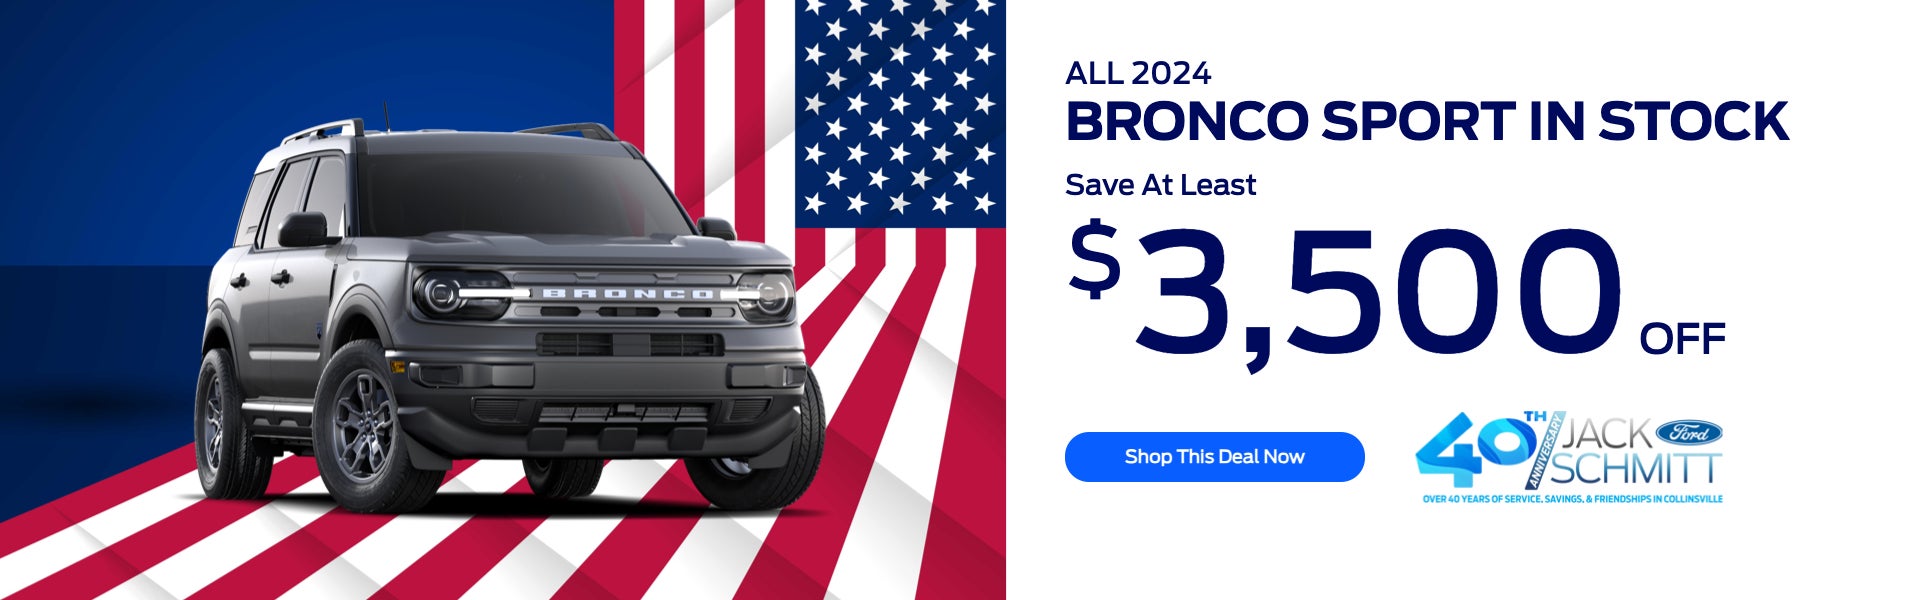 ALL 2024 BRONCO SPORTS IN STOCK